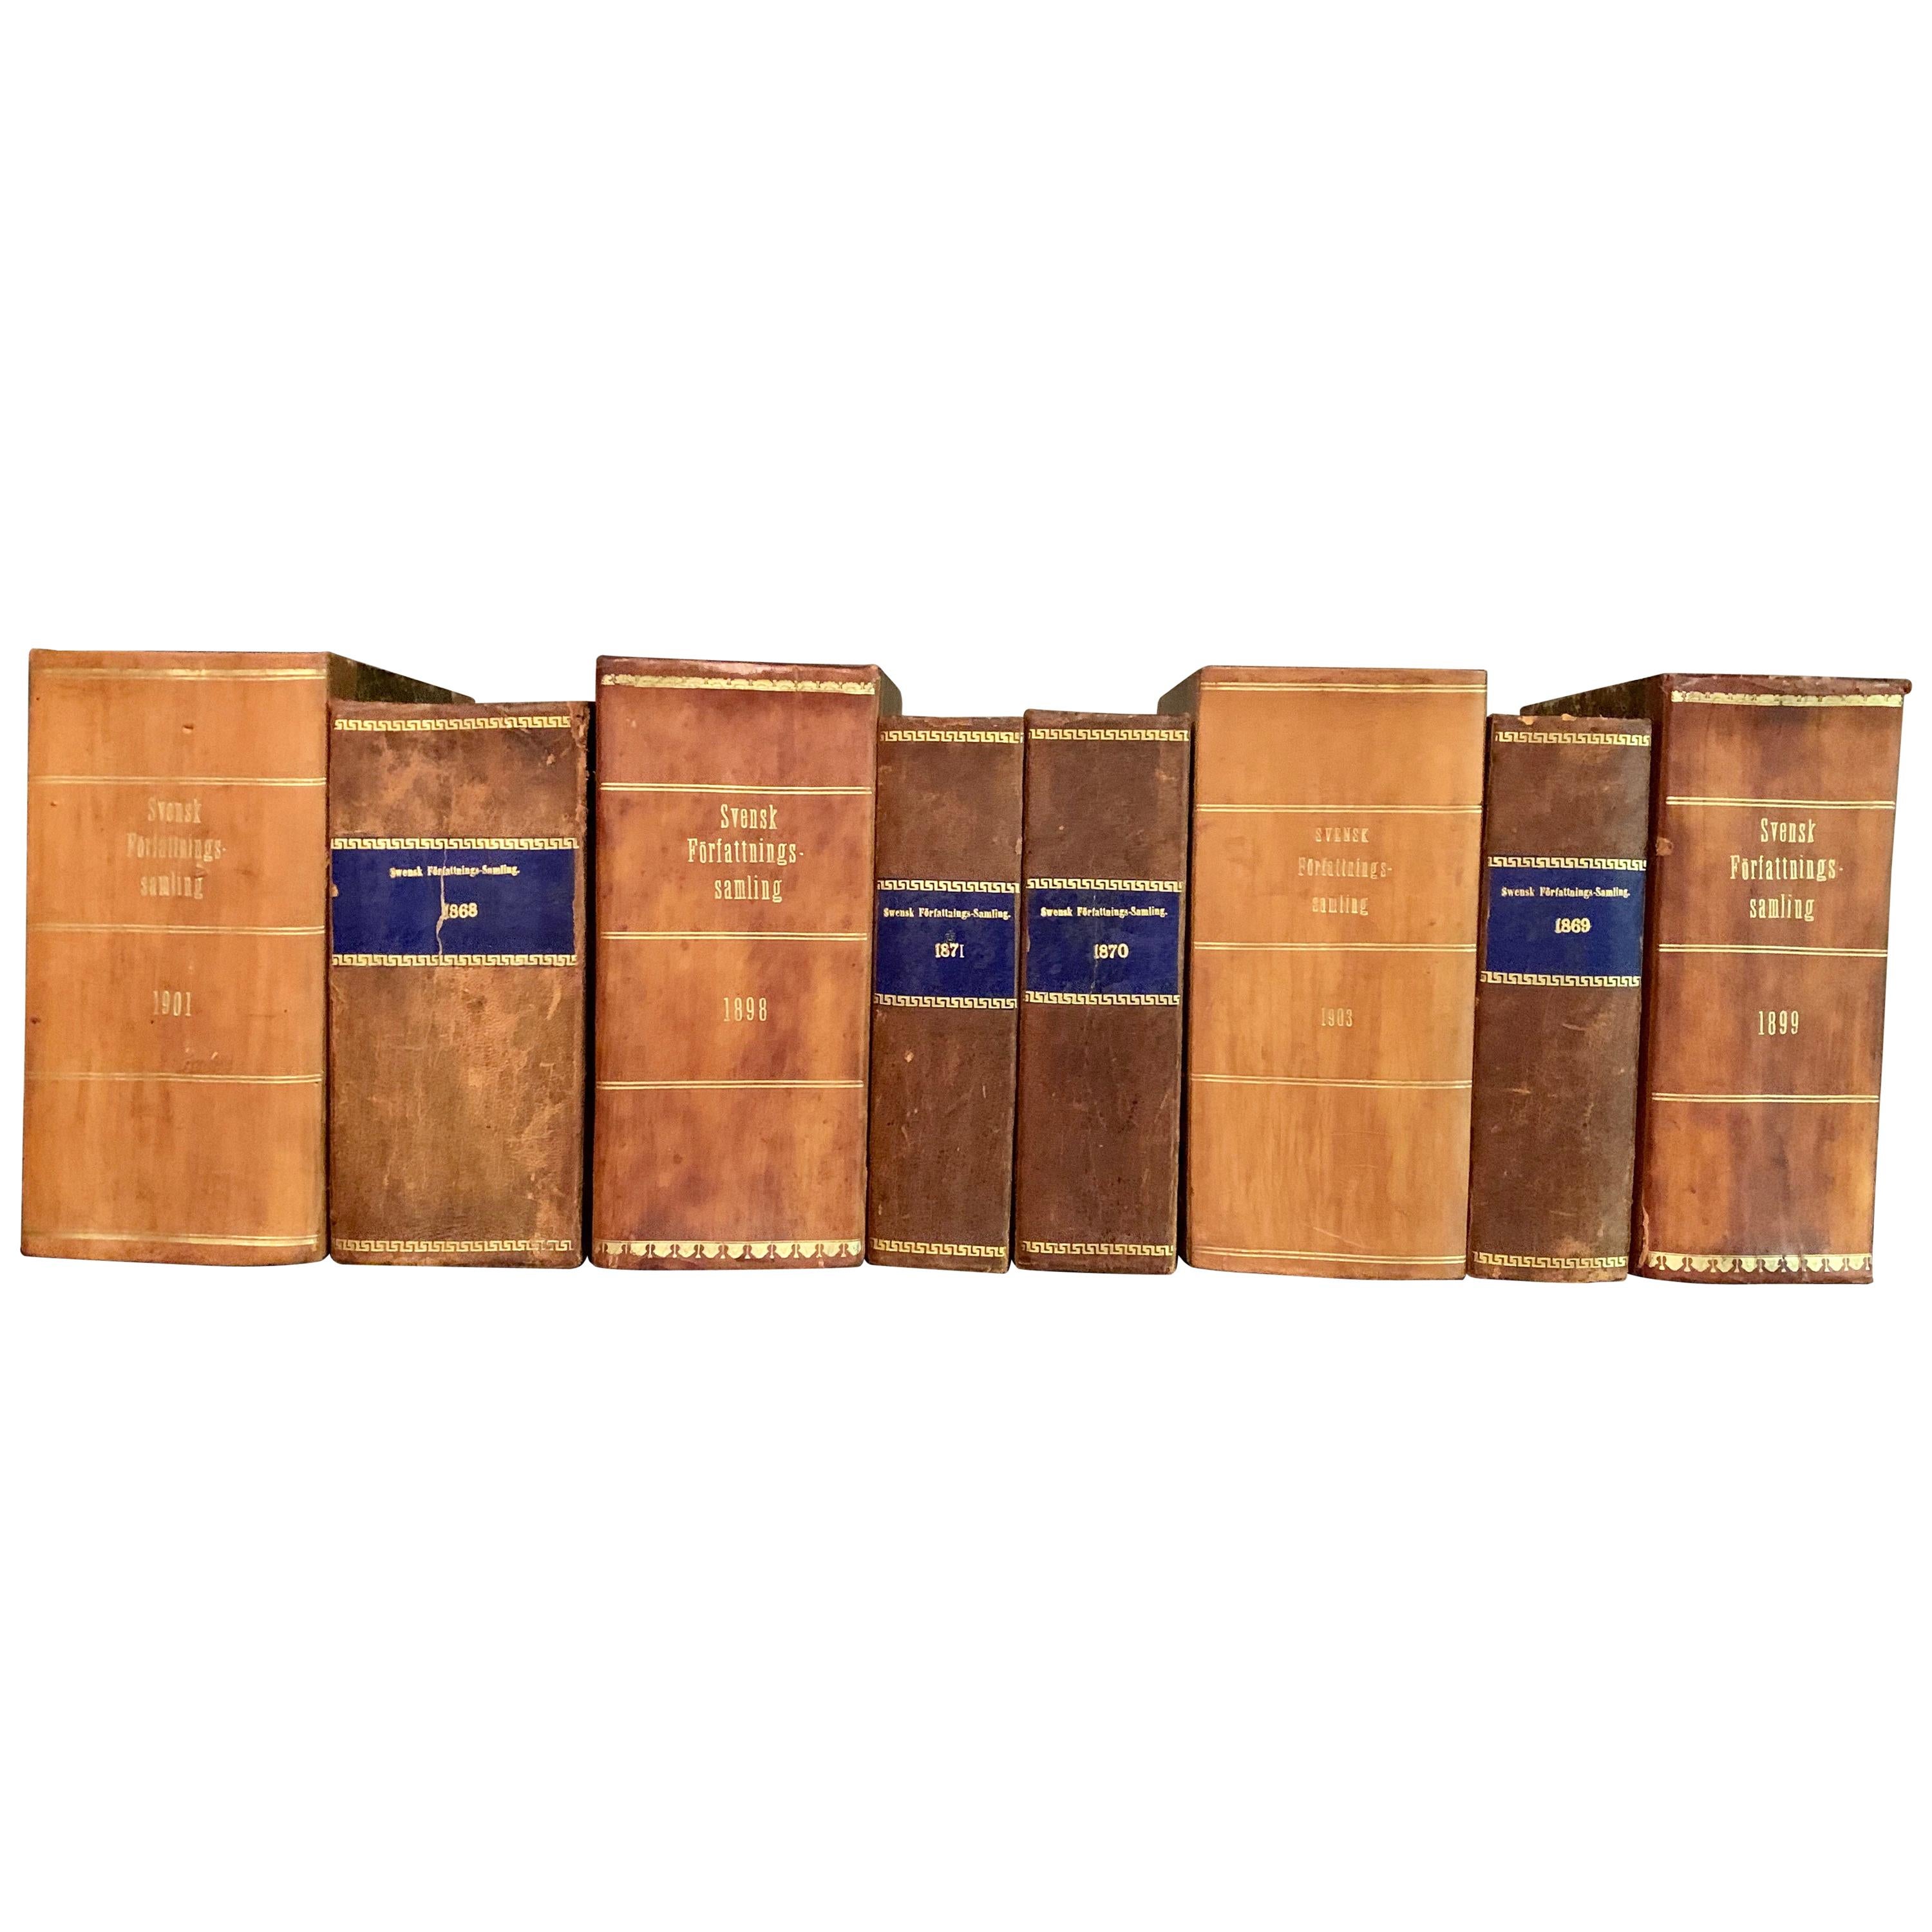 Collection of 8 Large Antique Leather Bounds Books, Sweden 1868-1903